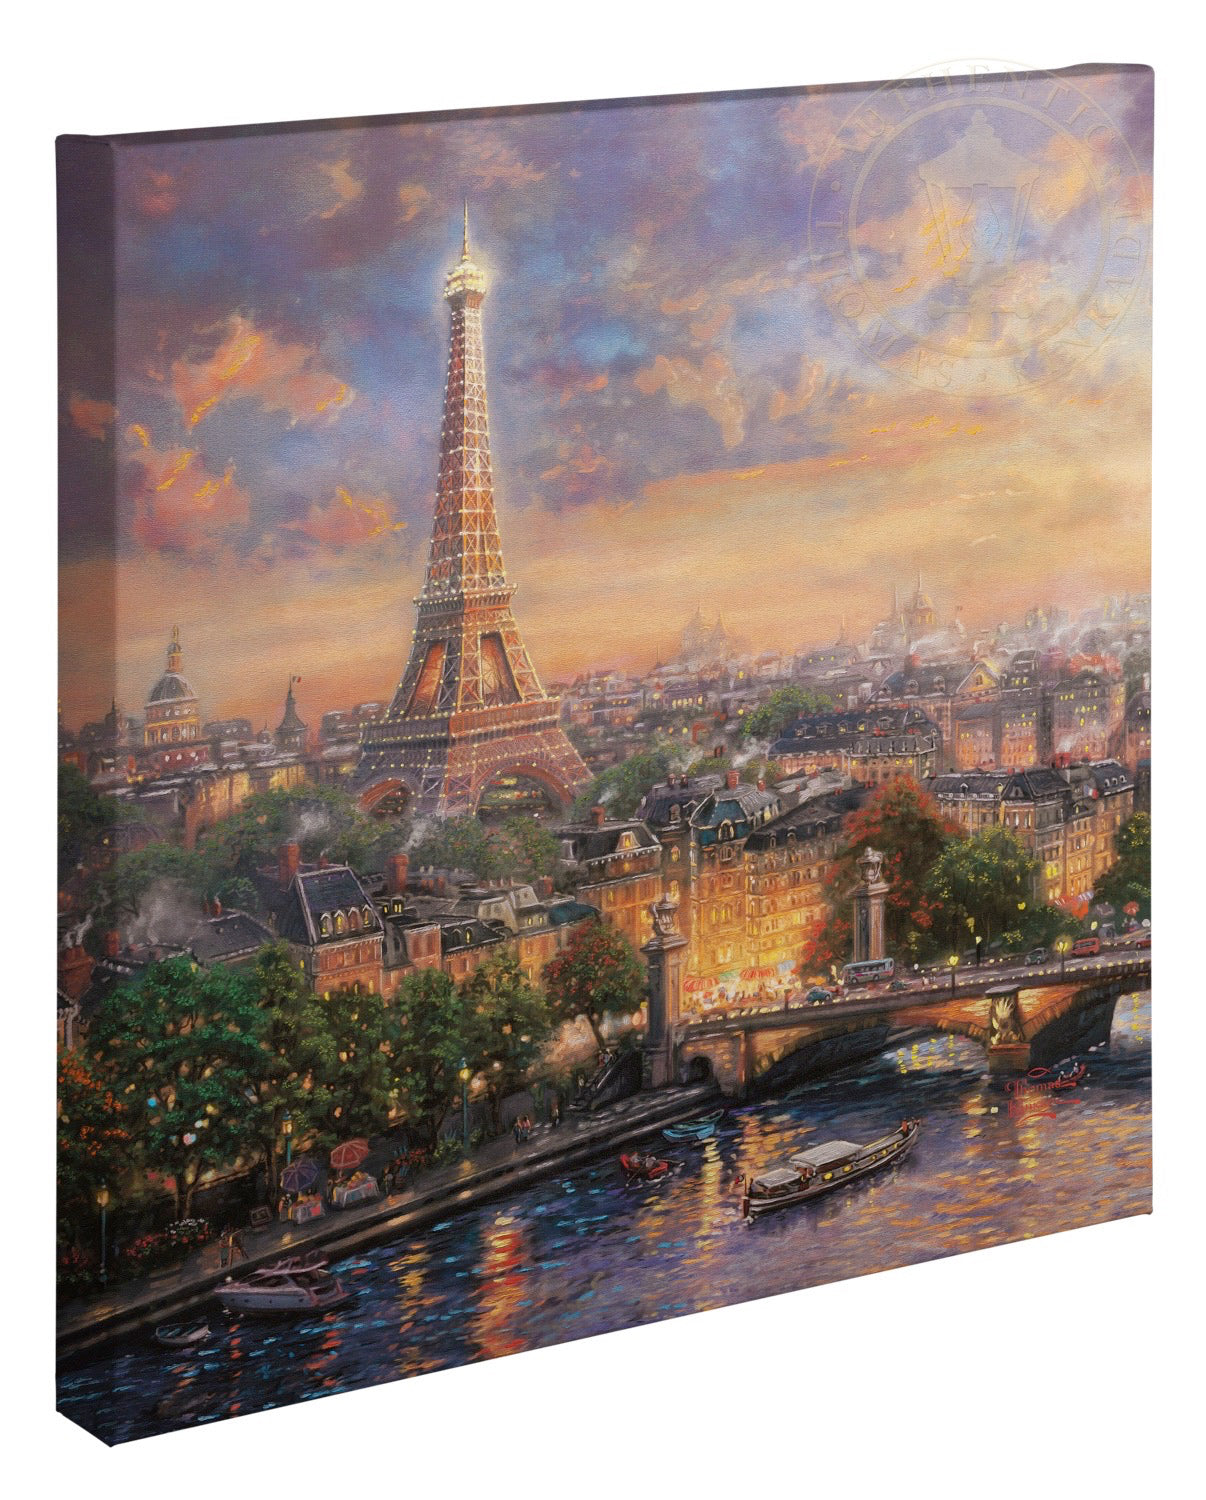 Thomas Kinkade Studios "Paris - City of Love" Limited and Open Edition Canvas